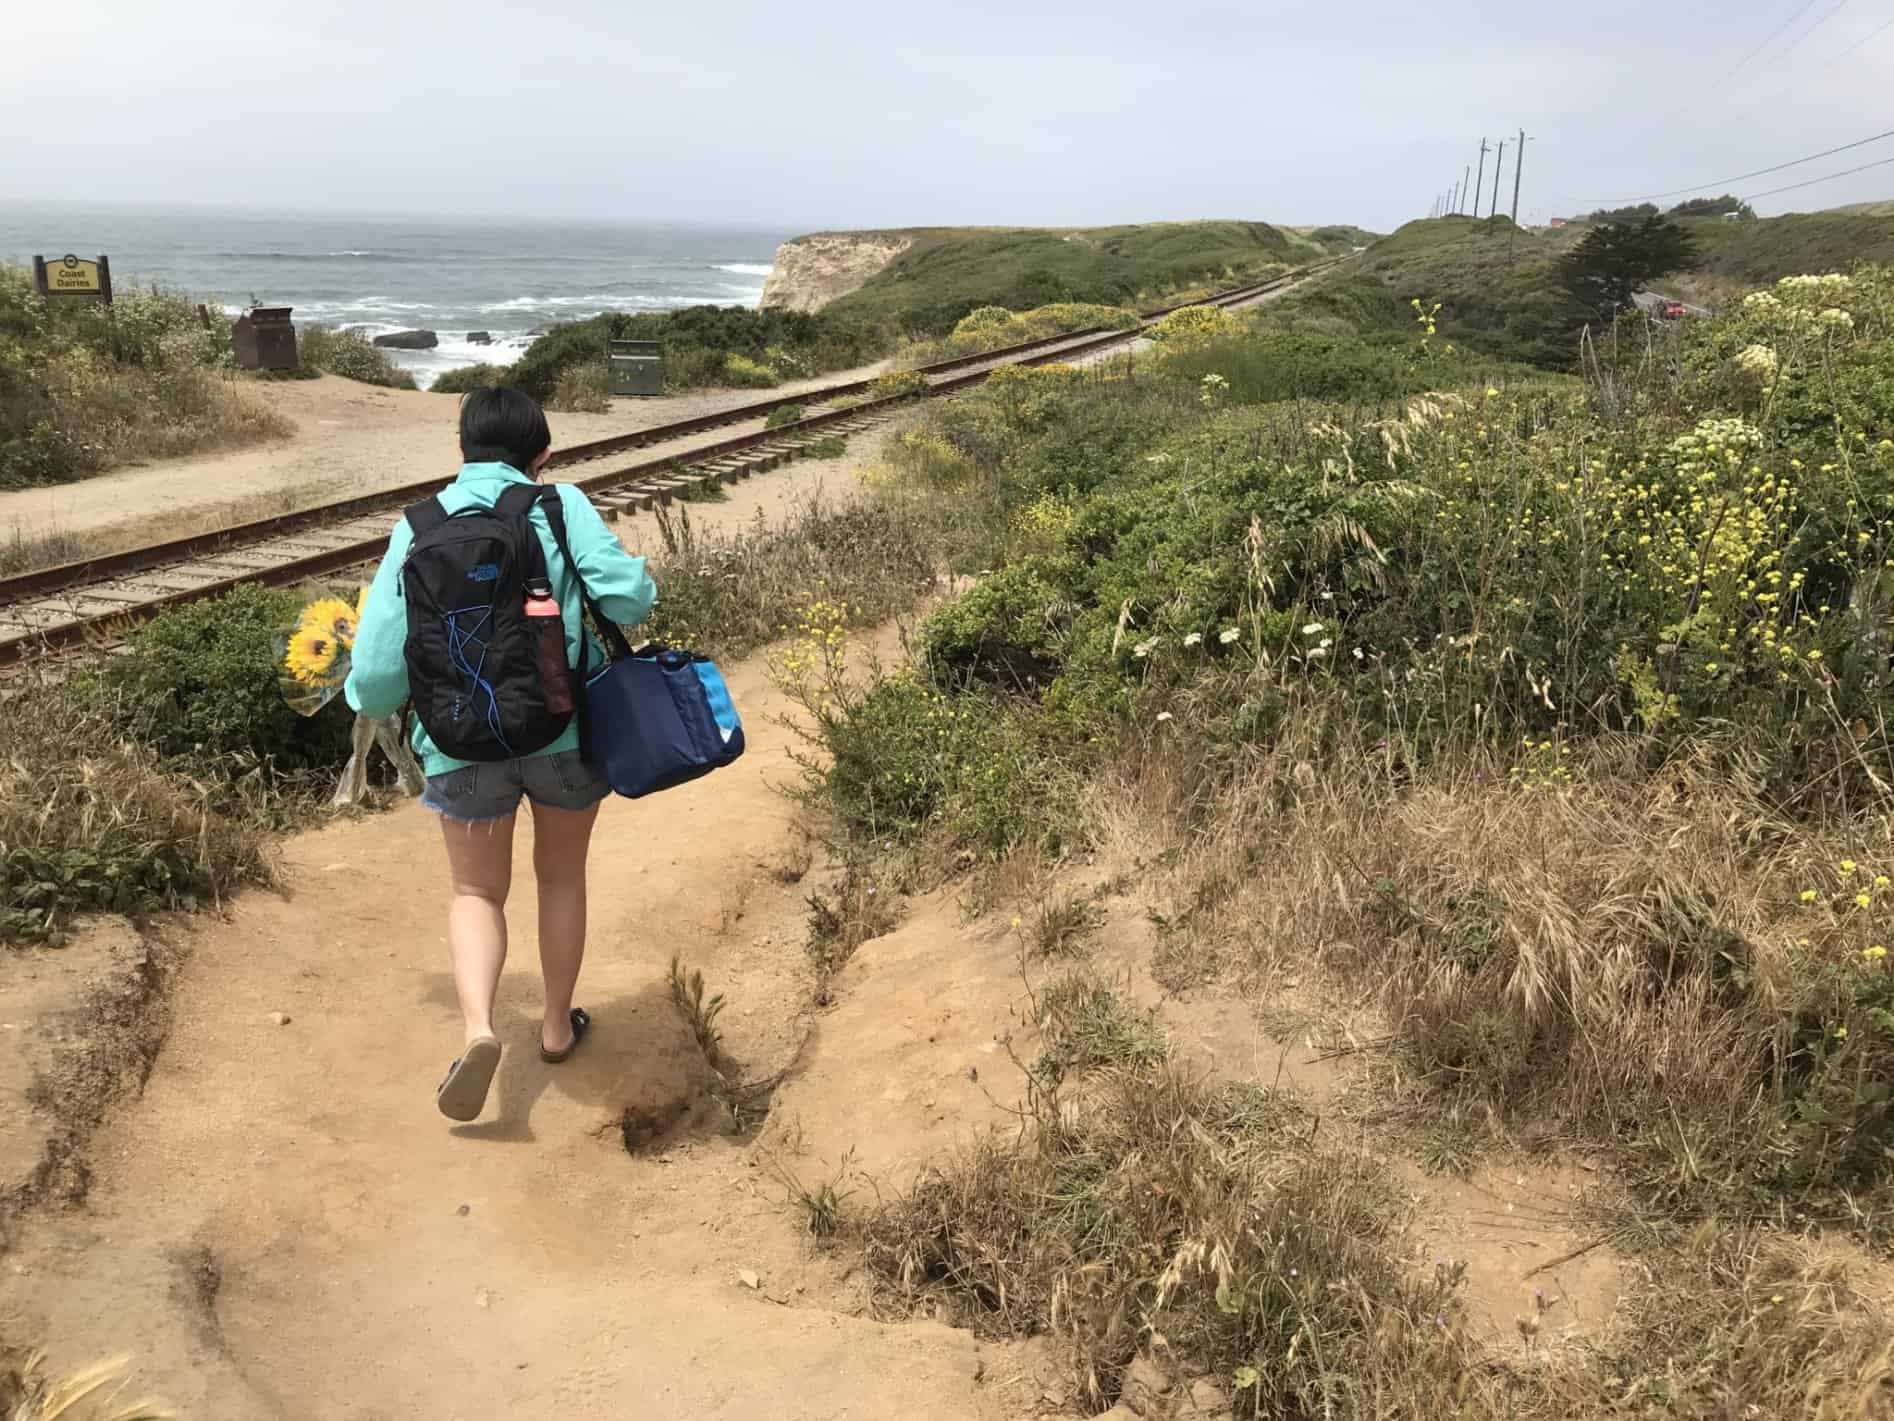 Meggie's cousin is walking toward the natural stairs going down to the beach. A railroad track is between us and the beach. Green shrubs grow on the clifftop. The sky is grey and full of gentle cloud coverage. Panther Beach, Santa Cruz, California, United States of America.